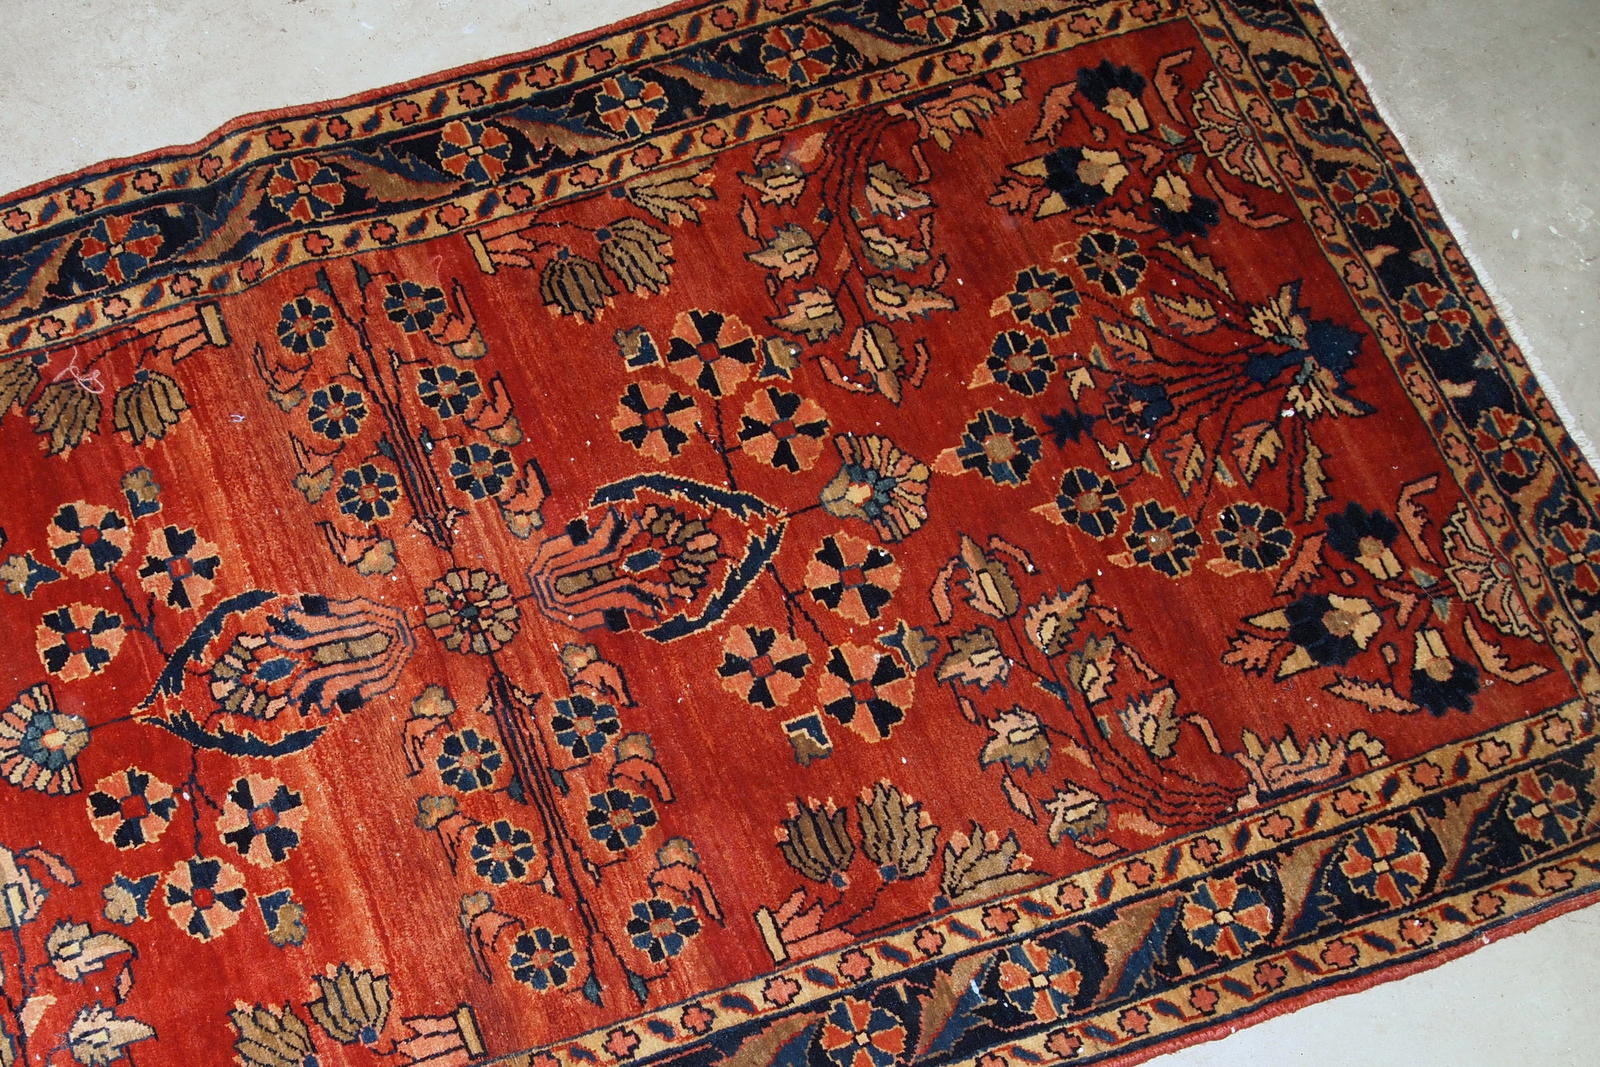 Handmade antique Persian Sarouk Mahajeran rug in original good condition. The rug is from the beginning of 20th century made in bright red wool.